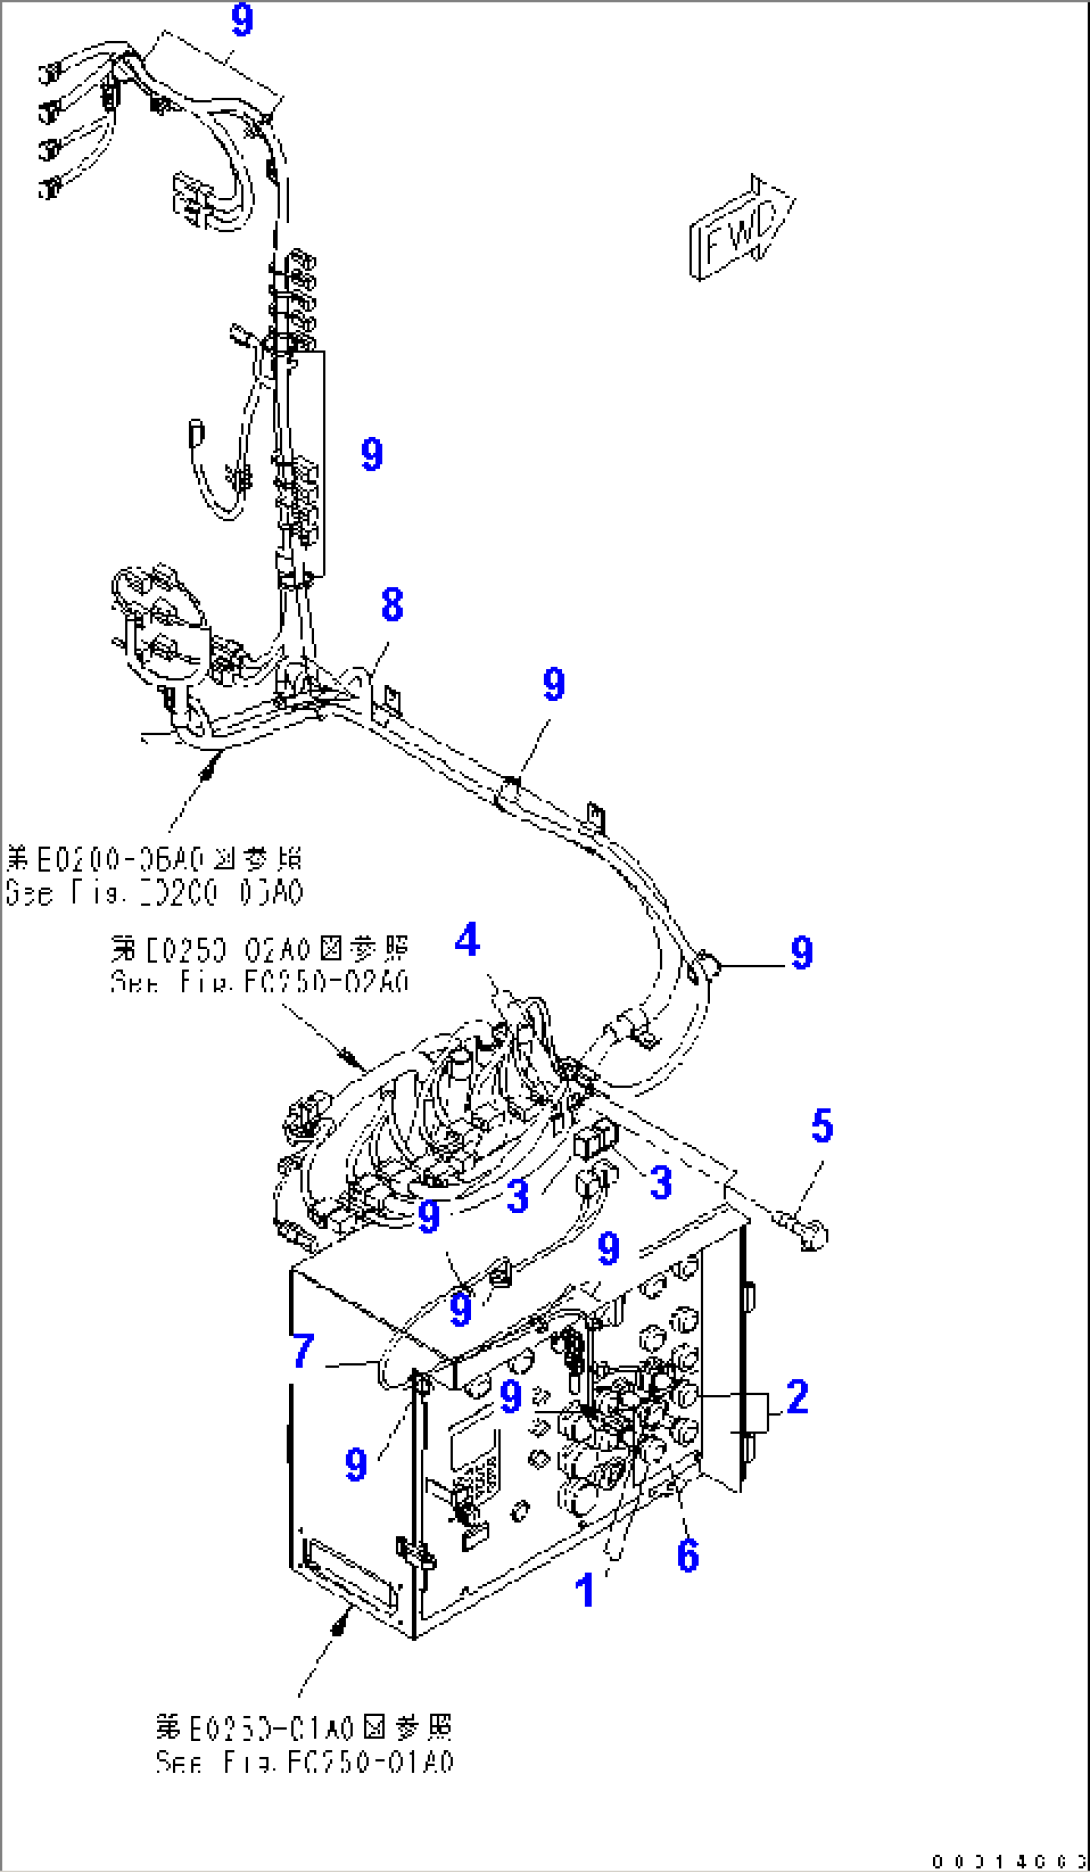 2-ATTACHIMENT WIRING (1/2) (WITH 2ND. BELT CONVEYOR AND VIBRATION SIEVE)